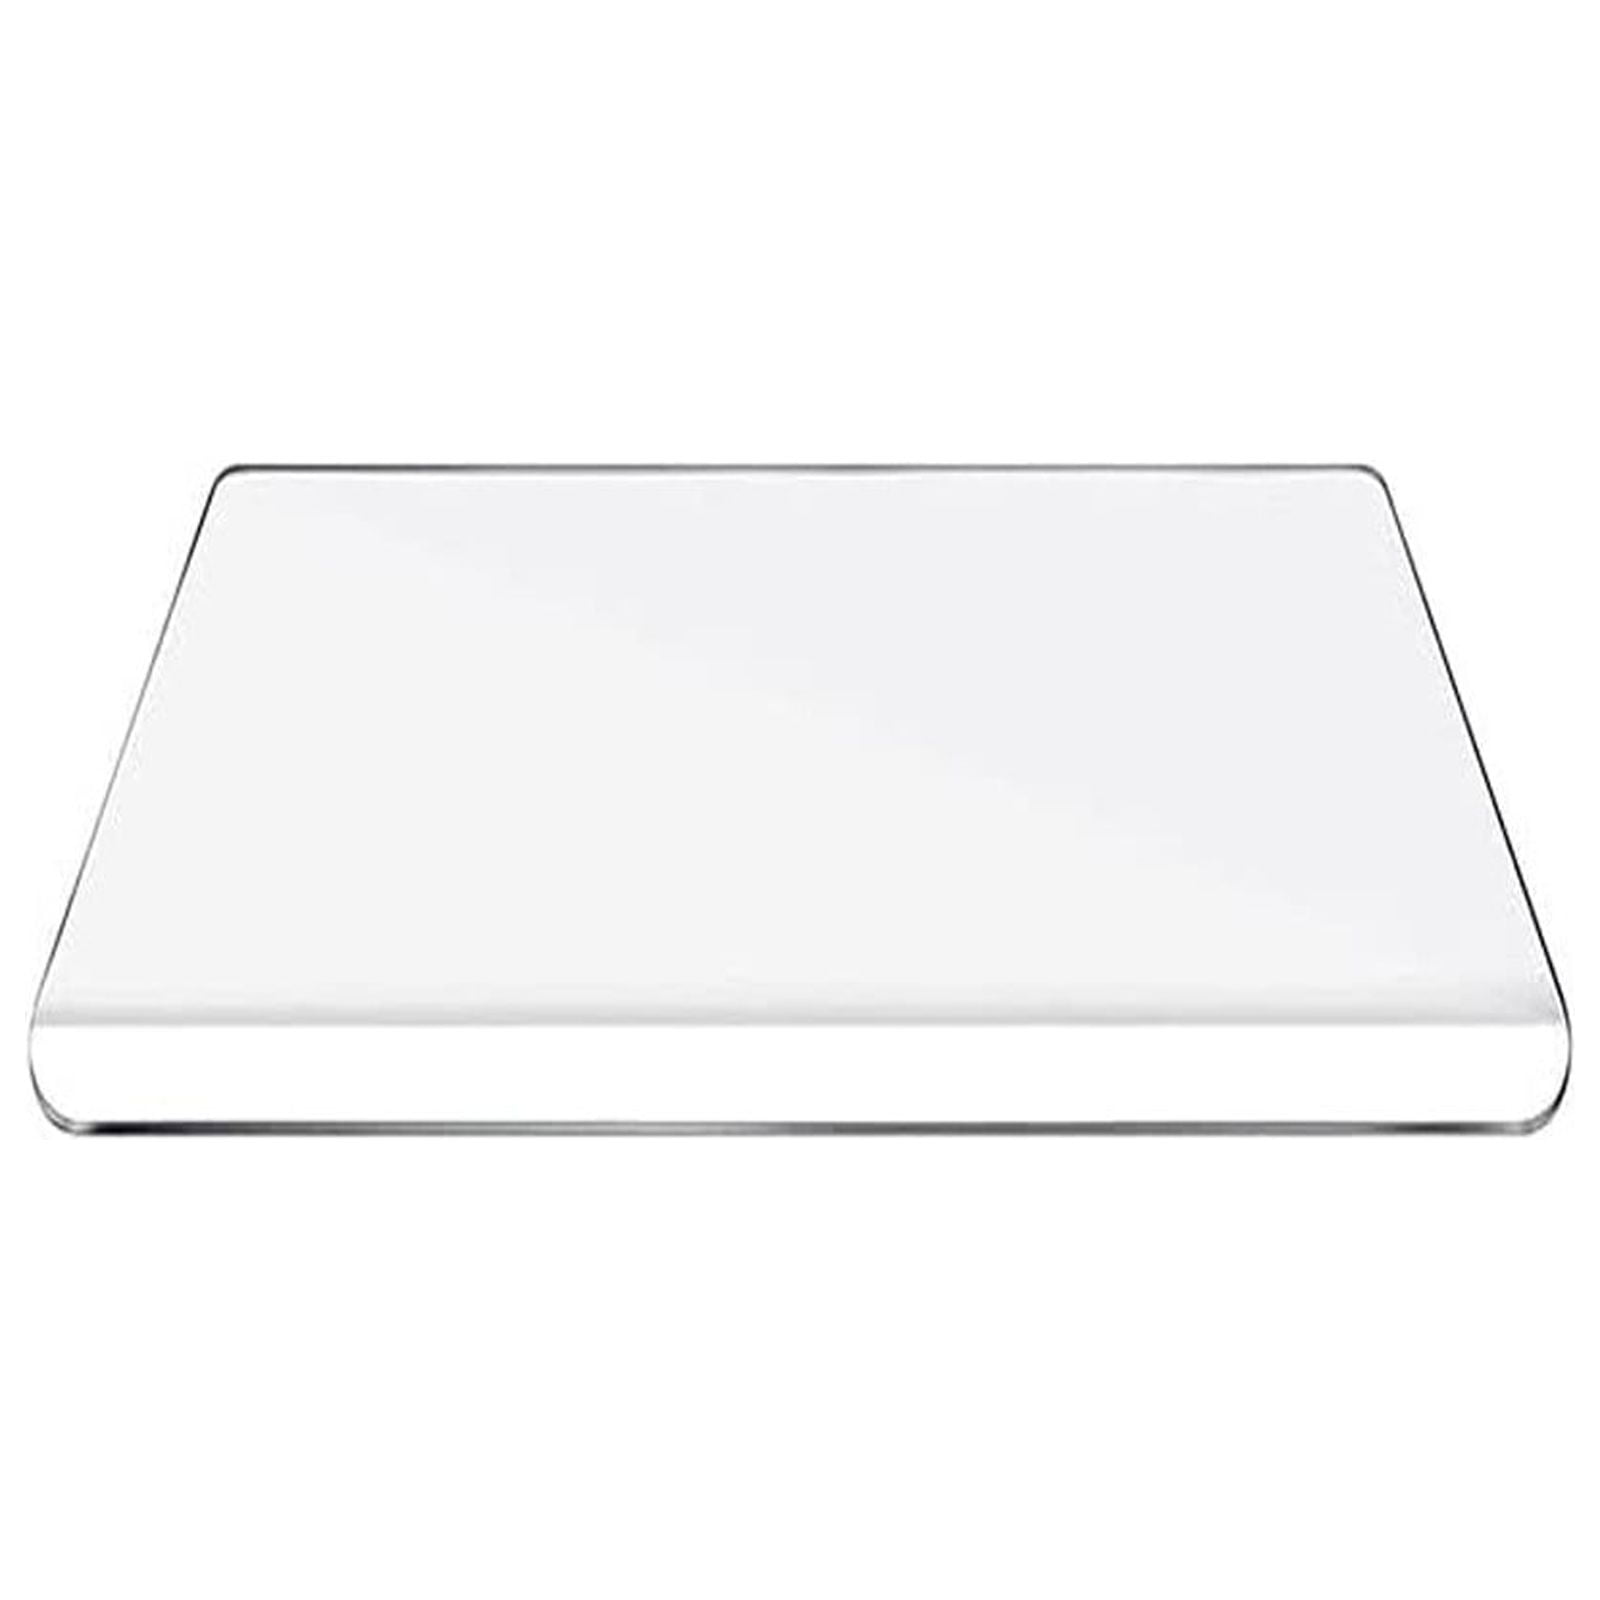 SRstrat Acrylic Cutting Boards For Kitchen Counter,Kitchen Countertop With  Acrylic Cutting Board, Countertop With Transparent Cutting Board With  Edges, Countertop Protector,24x18in 